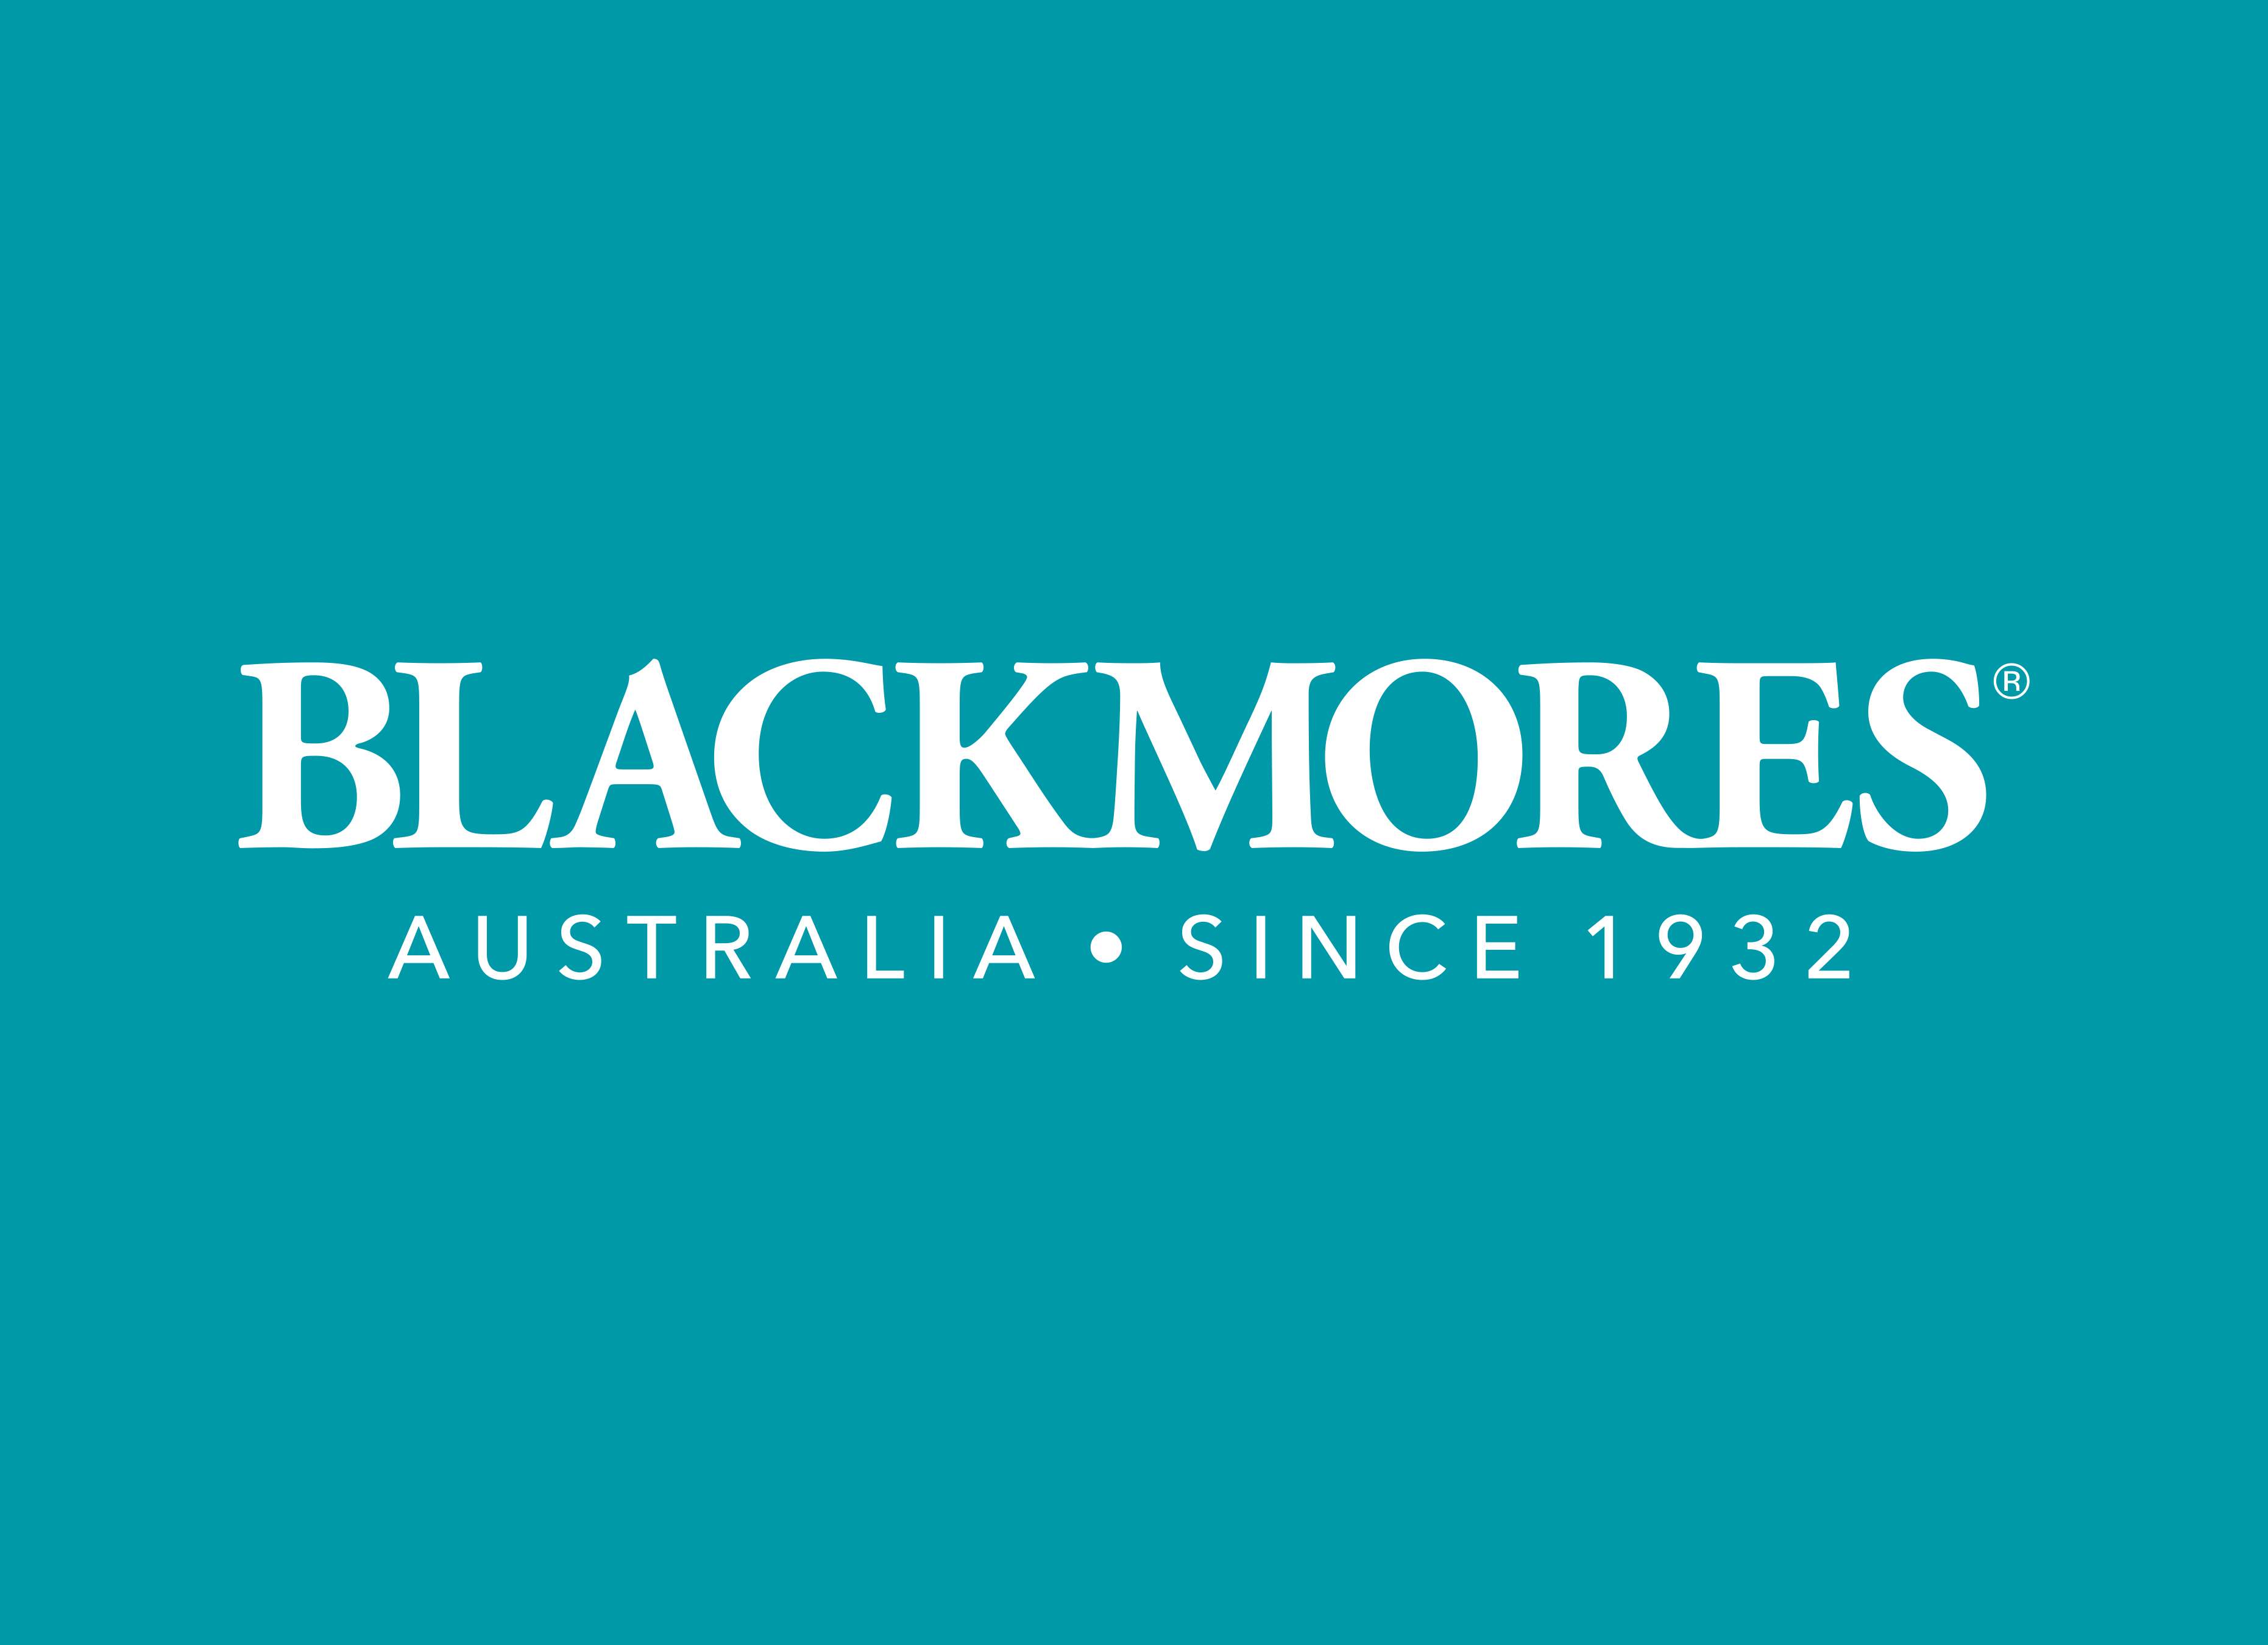 Blackmores logo with background.jpg